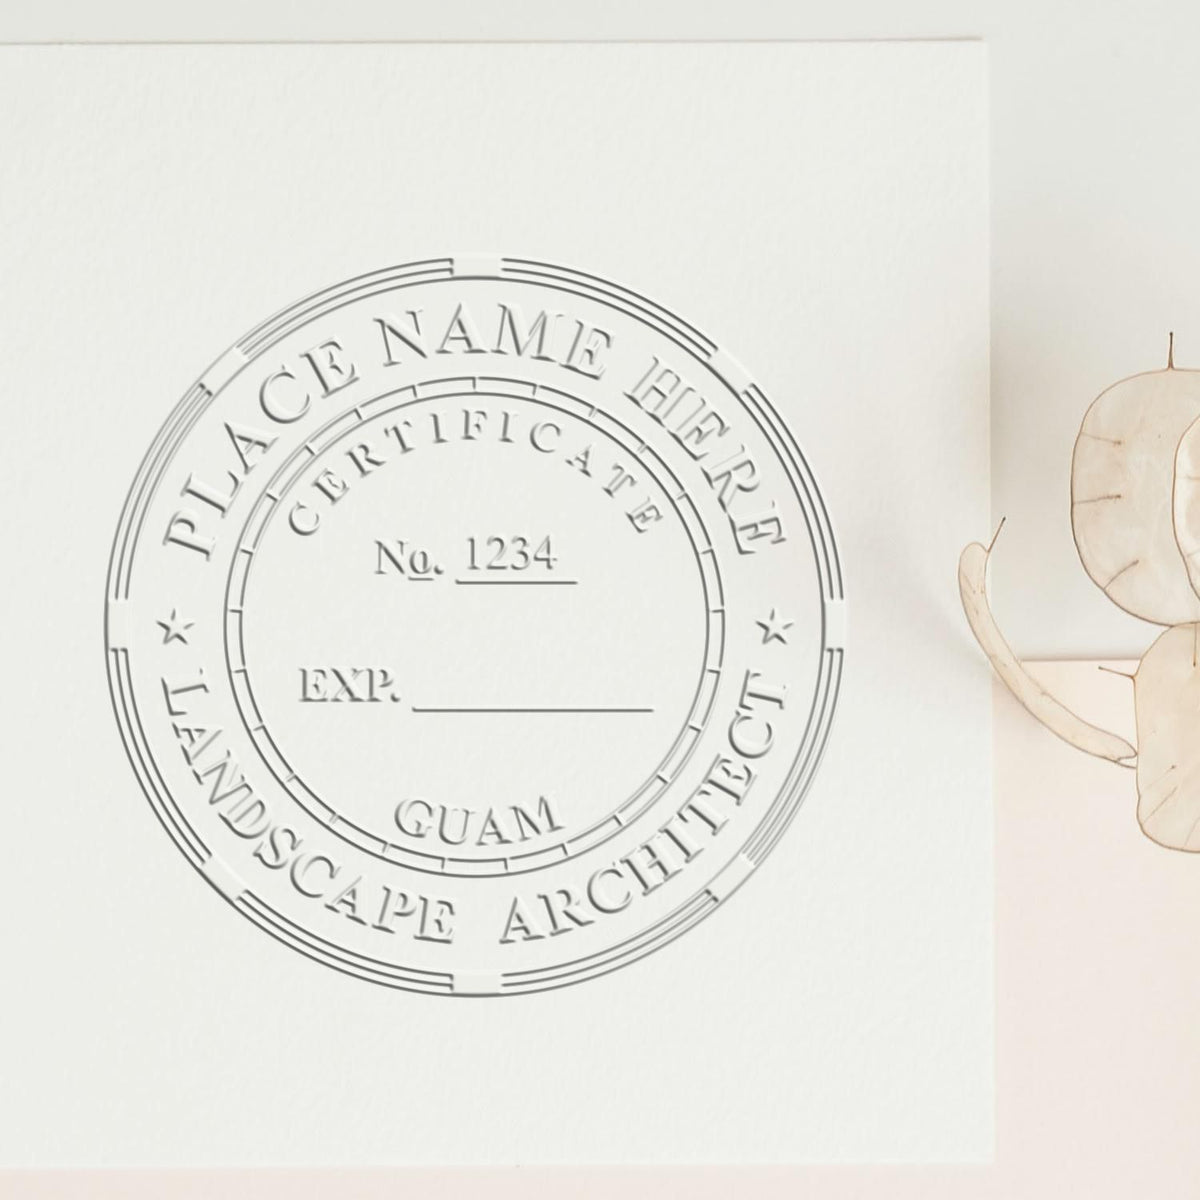 The Soft Pocket Guam Landscape Architect Embosser stamp impression comes to life with a crisp, detailed photo on paper - showcasing true professional quality.